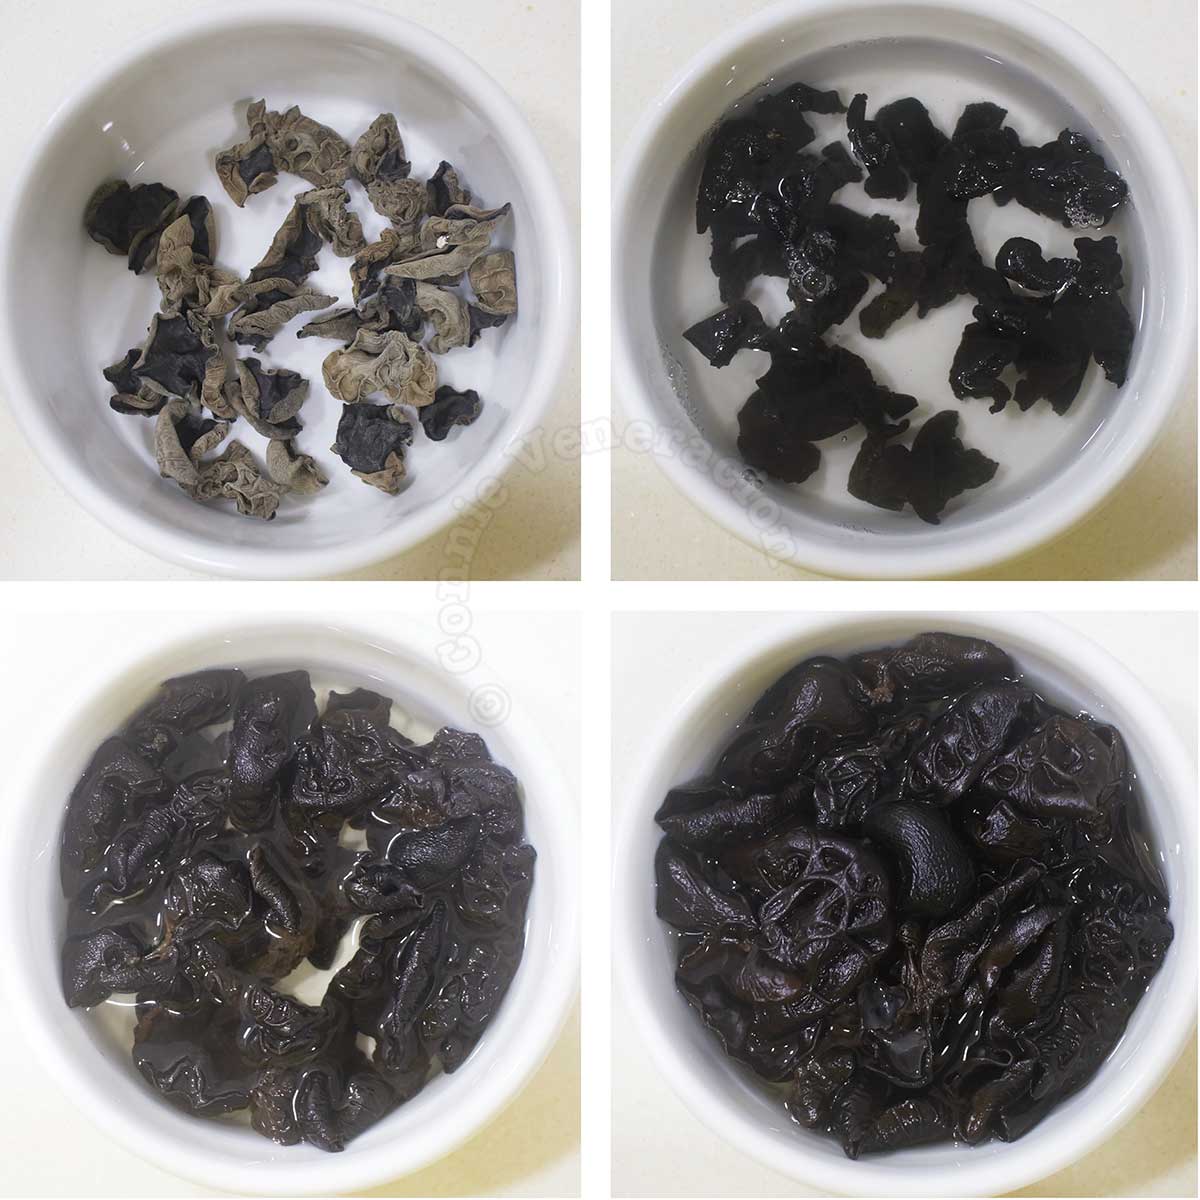 Black fungus before and after rehydrating